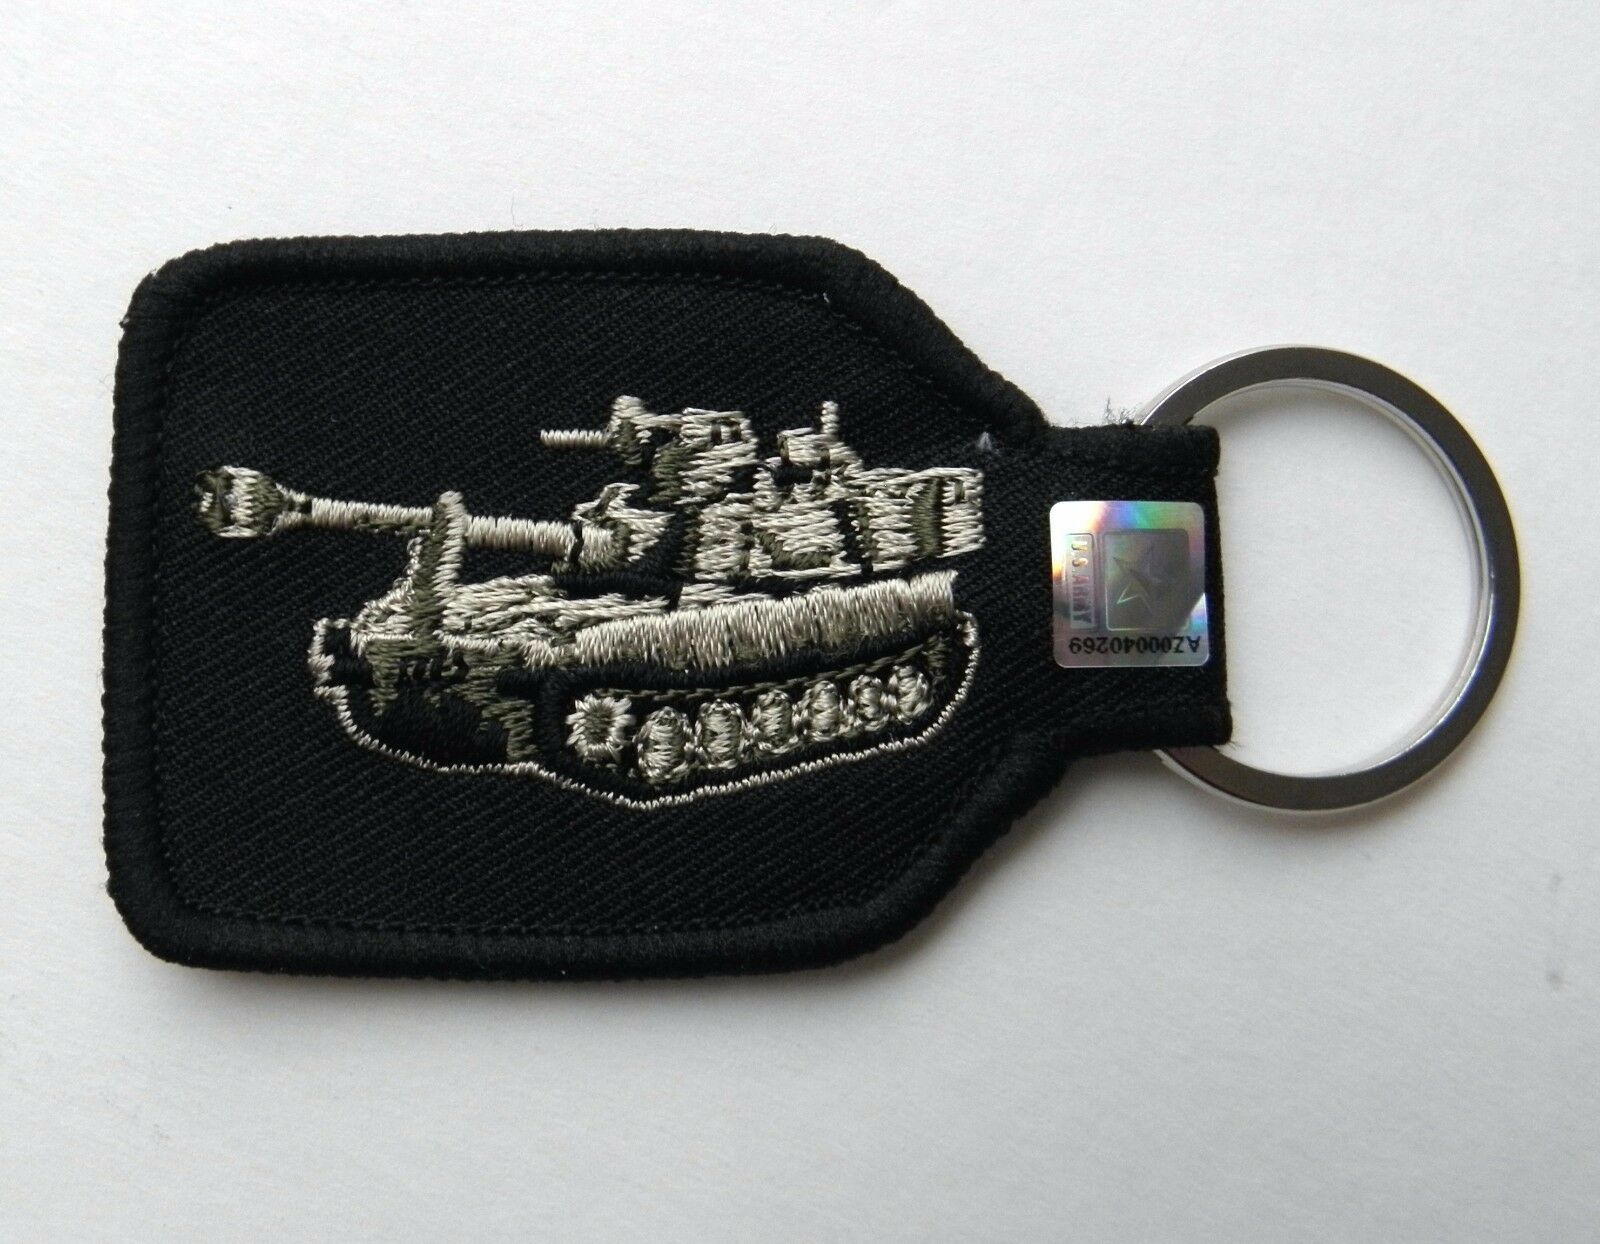 US ARMY ARMORED DIVISION TANK EMBROIDERED KEY CHAIN KEY RING 1.75 X 2.75 - £4.50 GBP